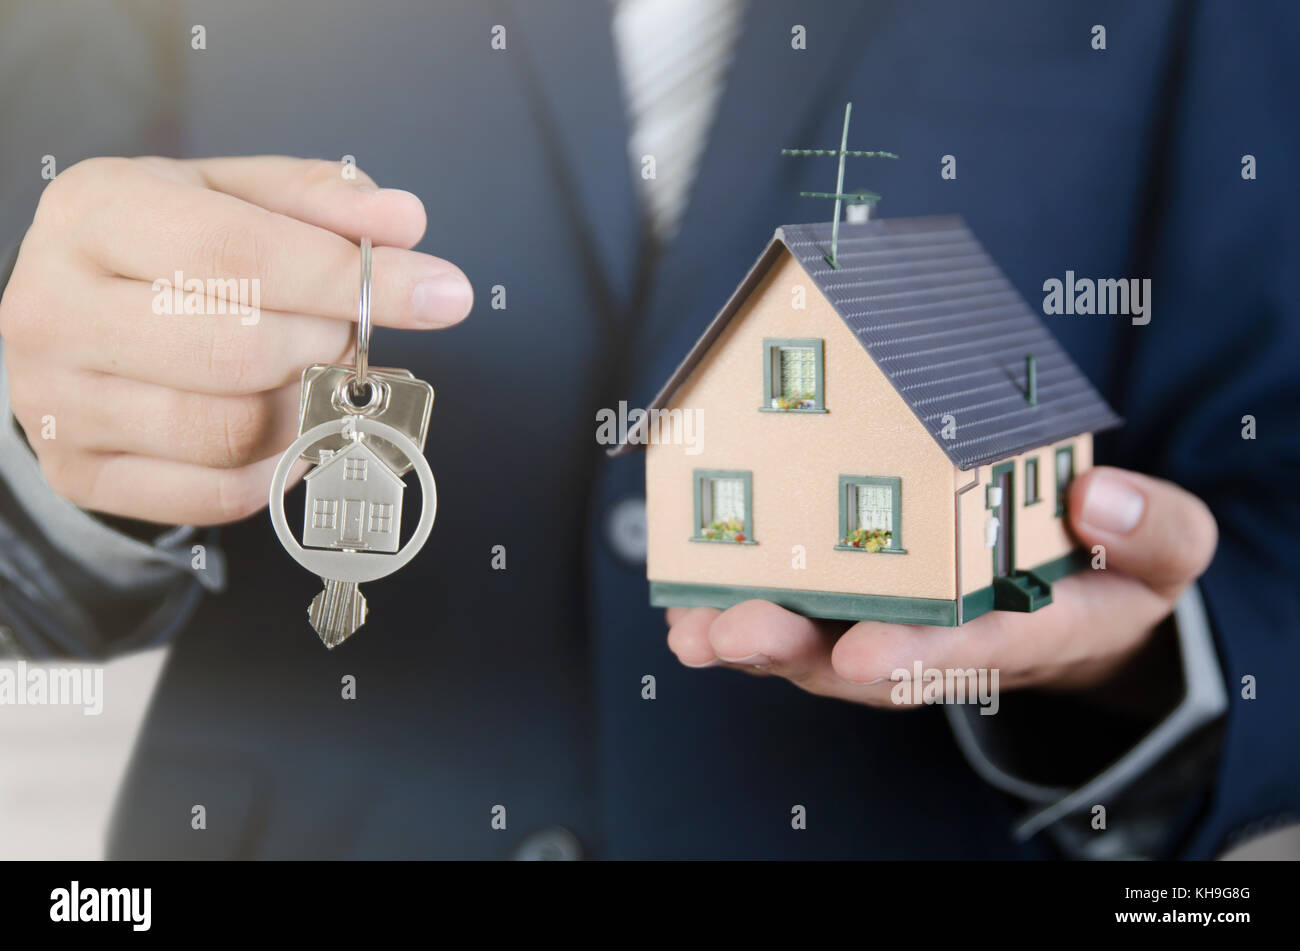 Real estate agent with home keys and house miniature. realestate key apartment real estate home house homeowner concept Stock Photo